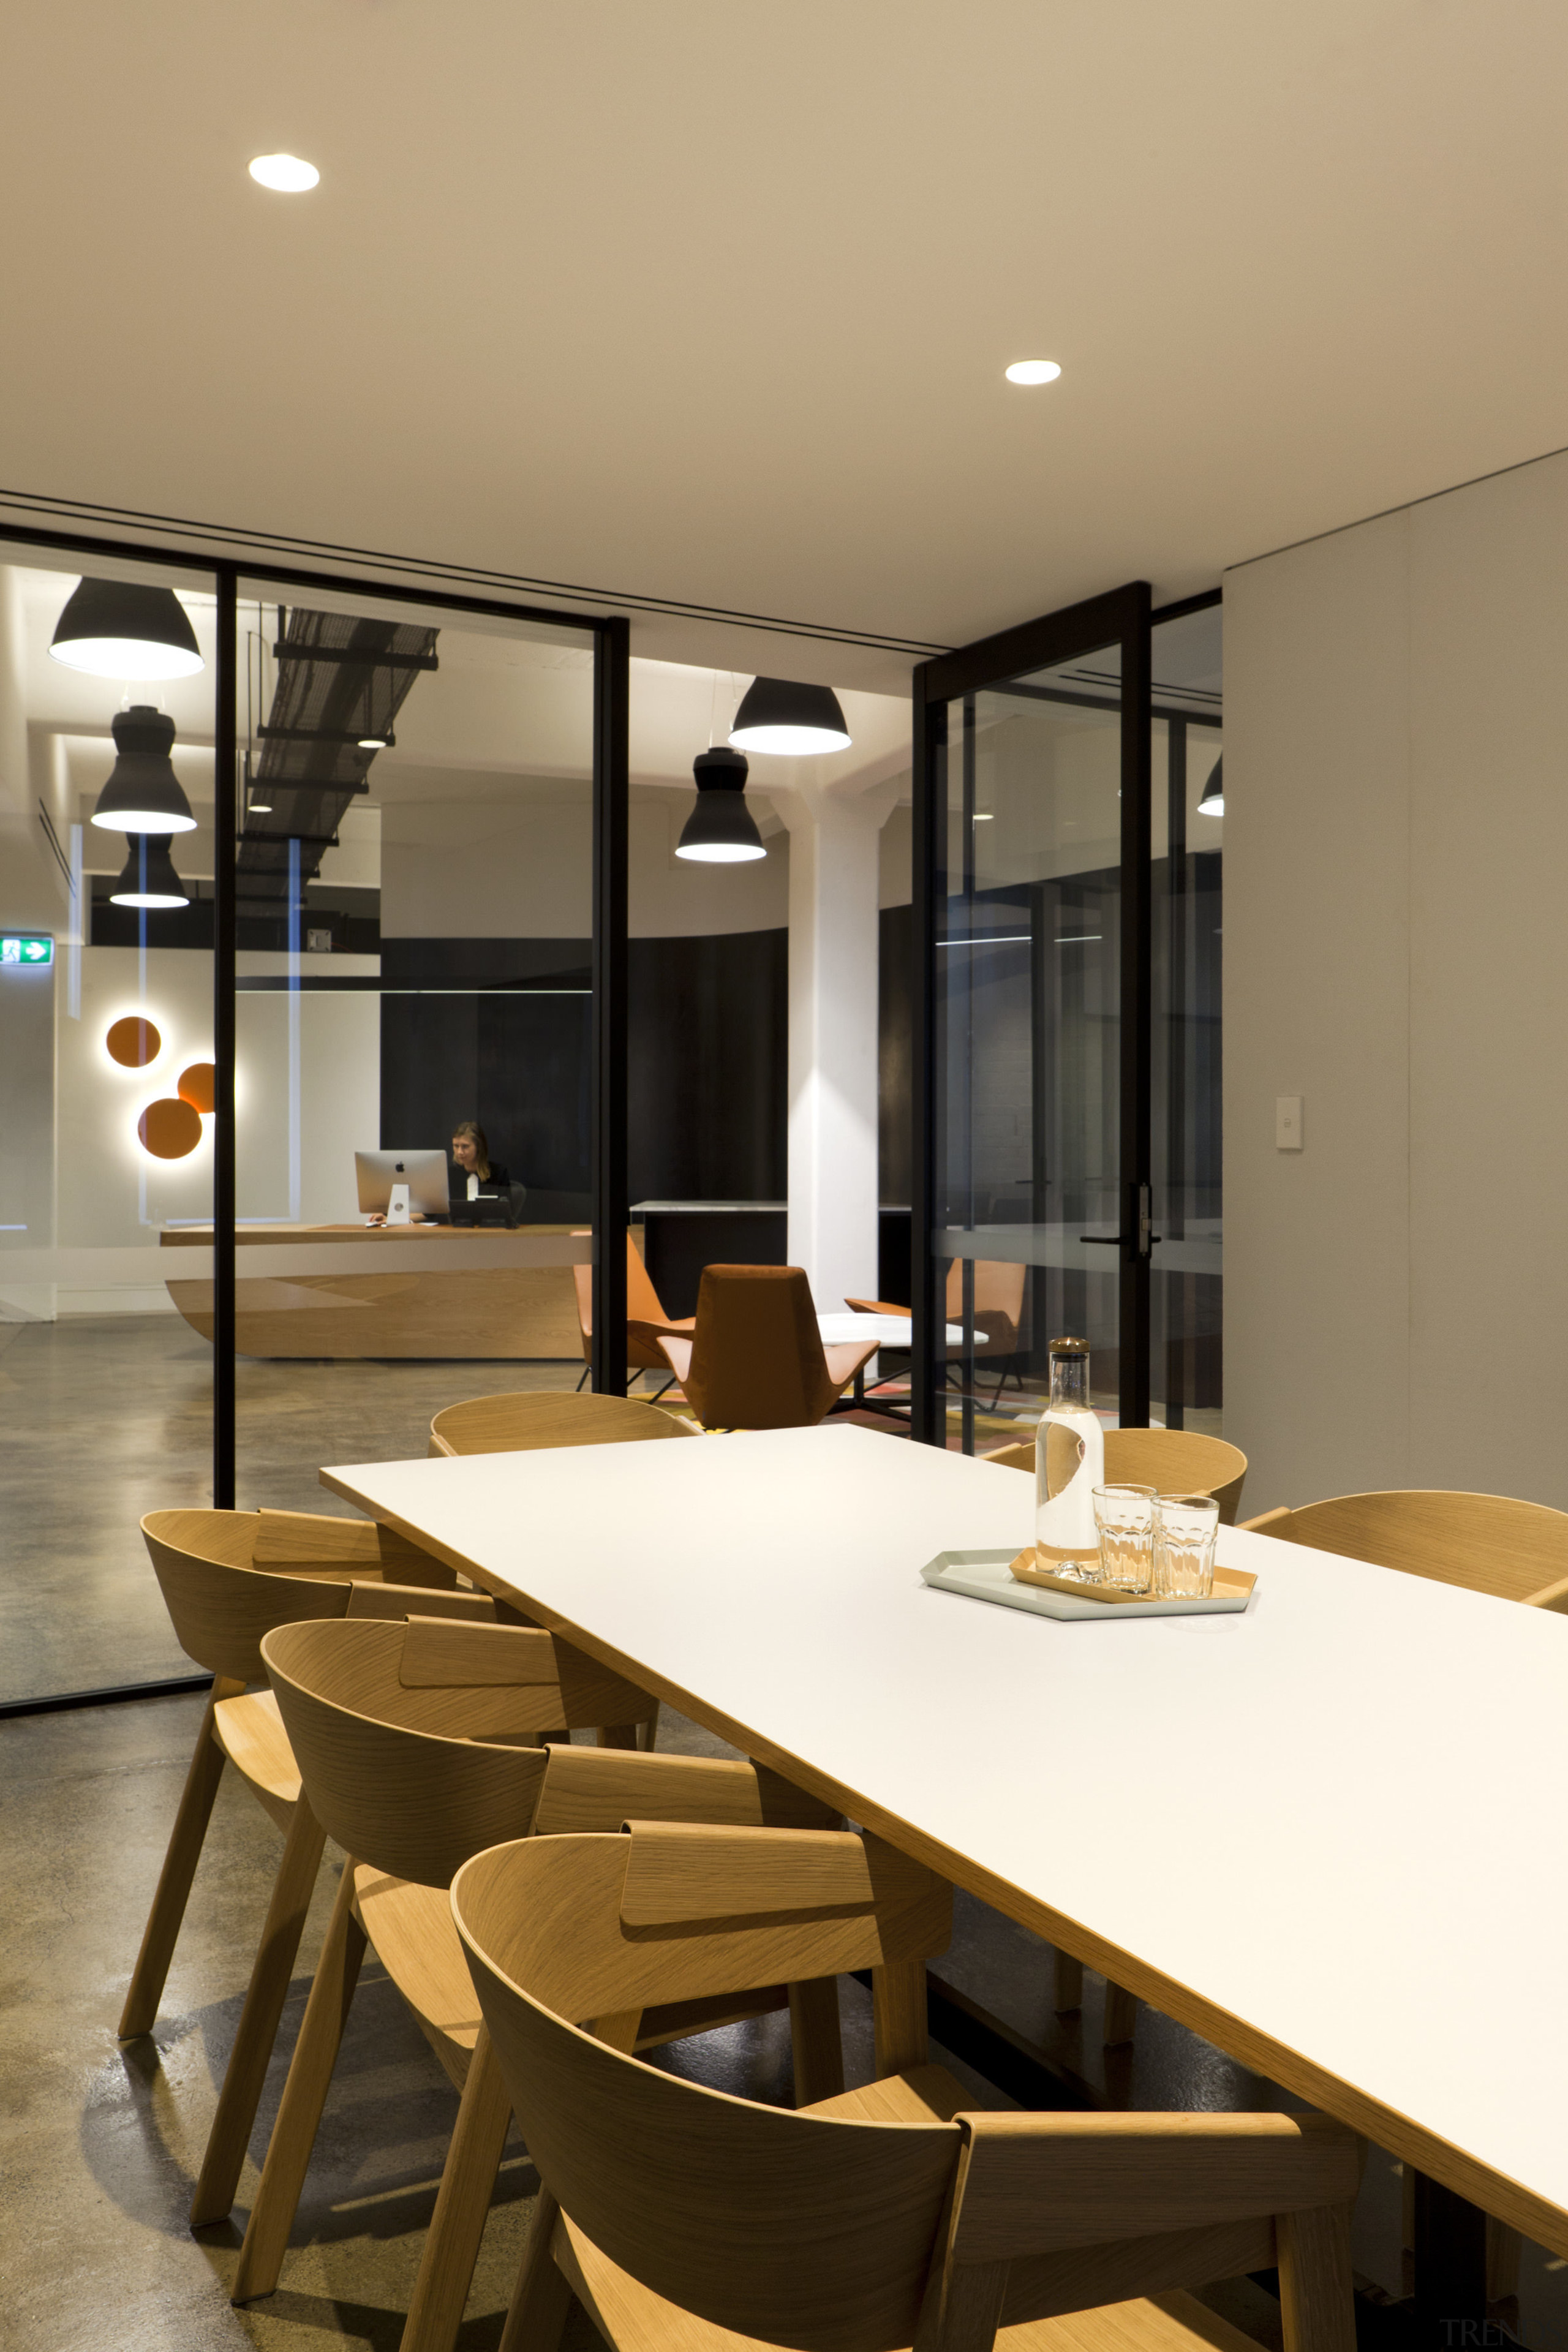 In this office fit-out, ceiling-height sliding doors combine dining room, furniture, interior design, room, table, brown, orange